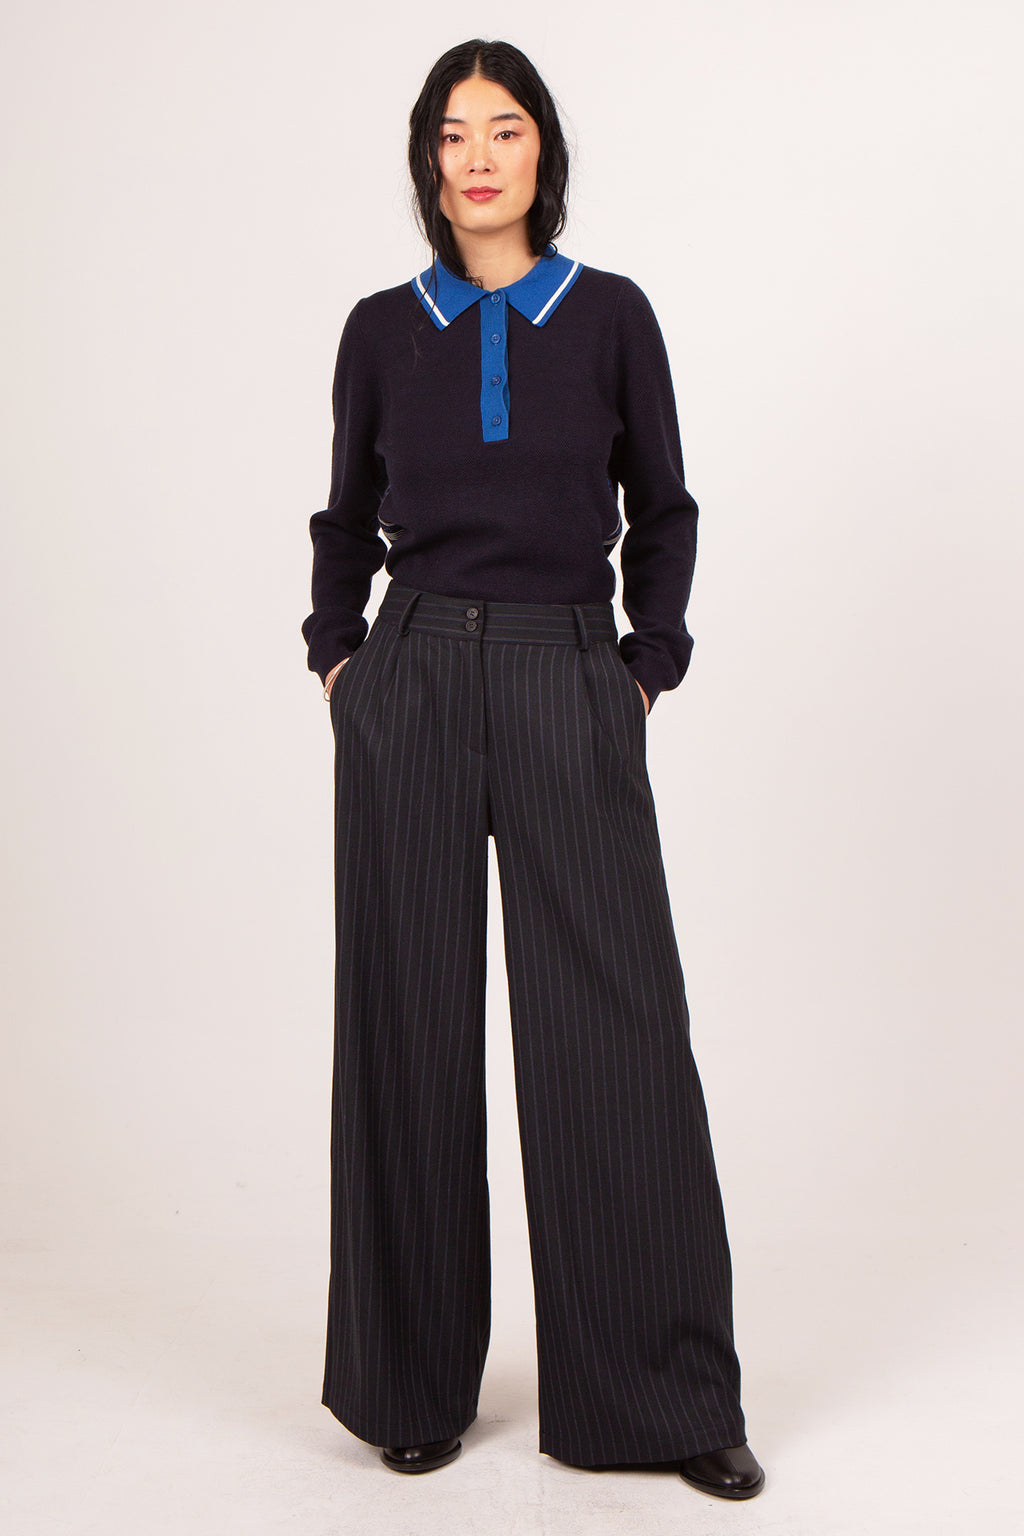 Zoella blue pinstriped trousers